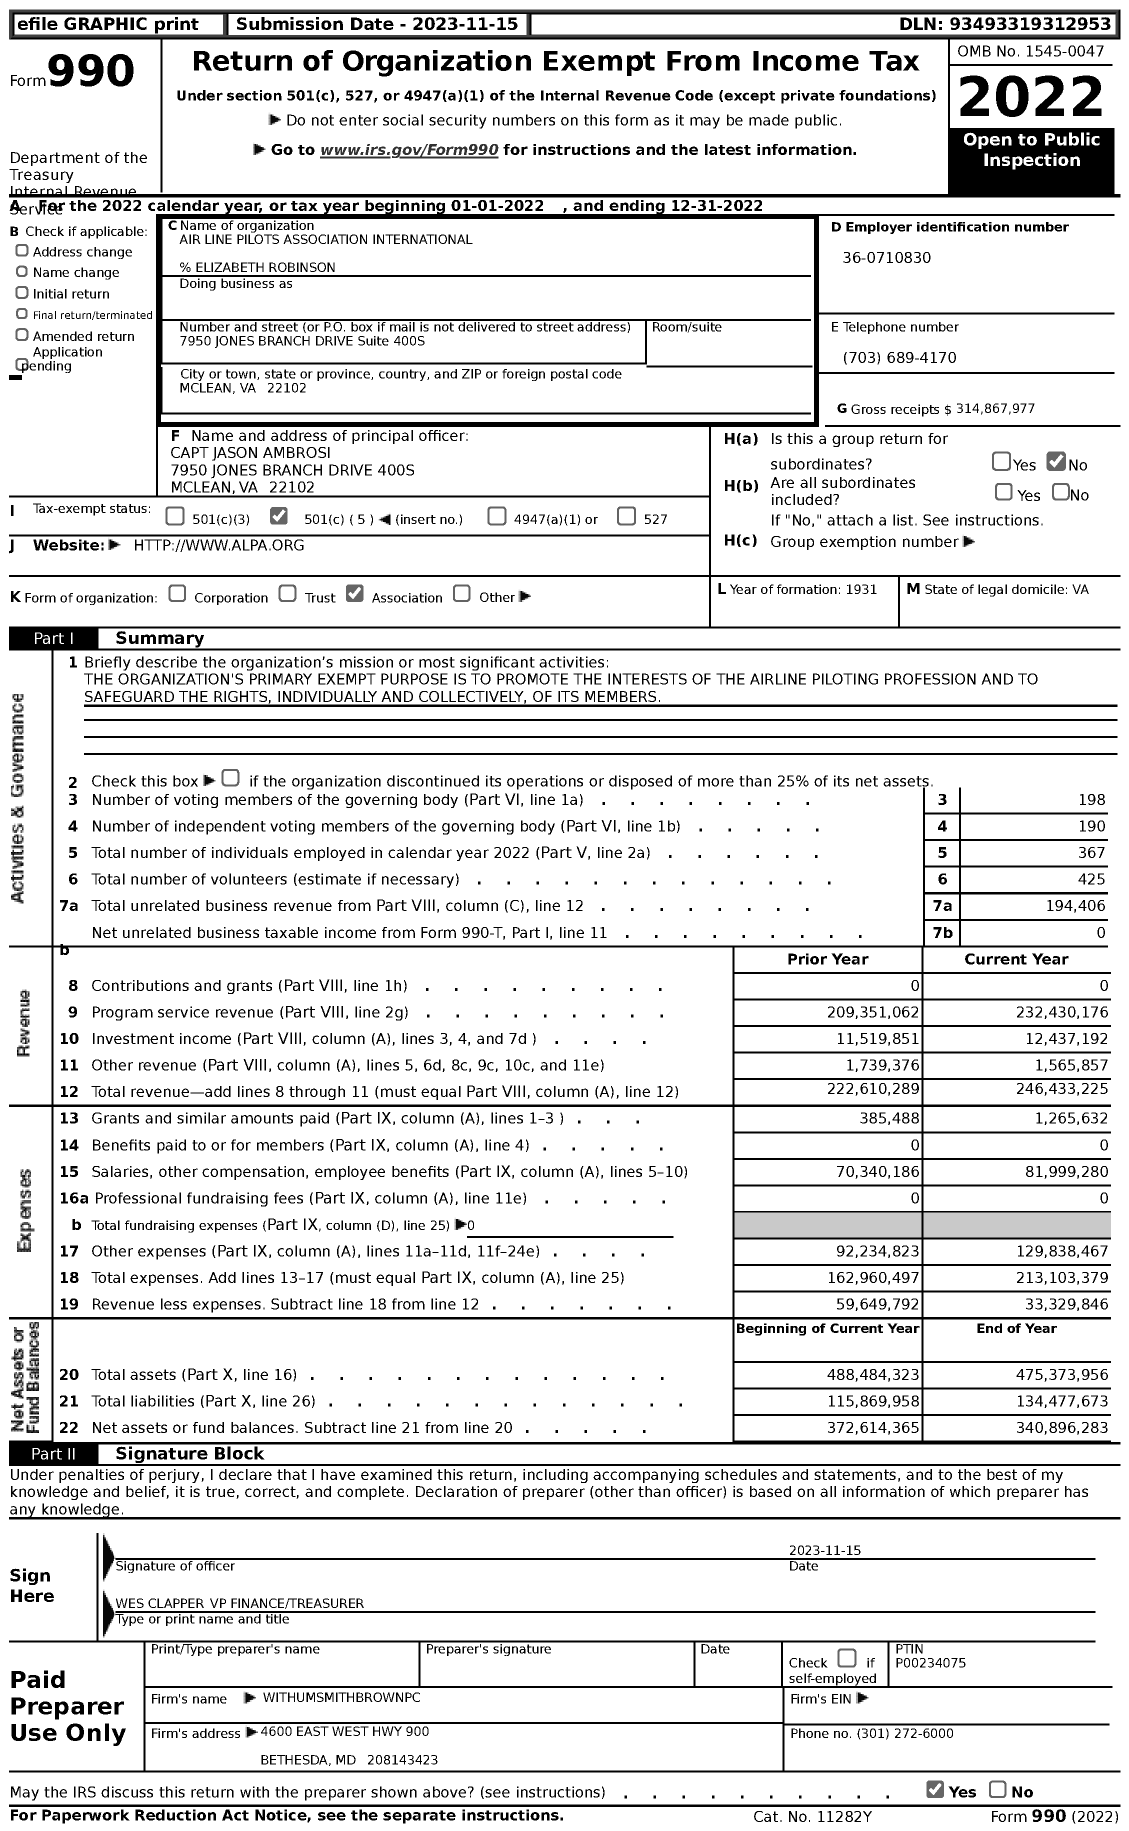 Image of first page of 2022 Form 990 for Air Line Pilots Association International (ALPA)